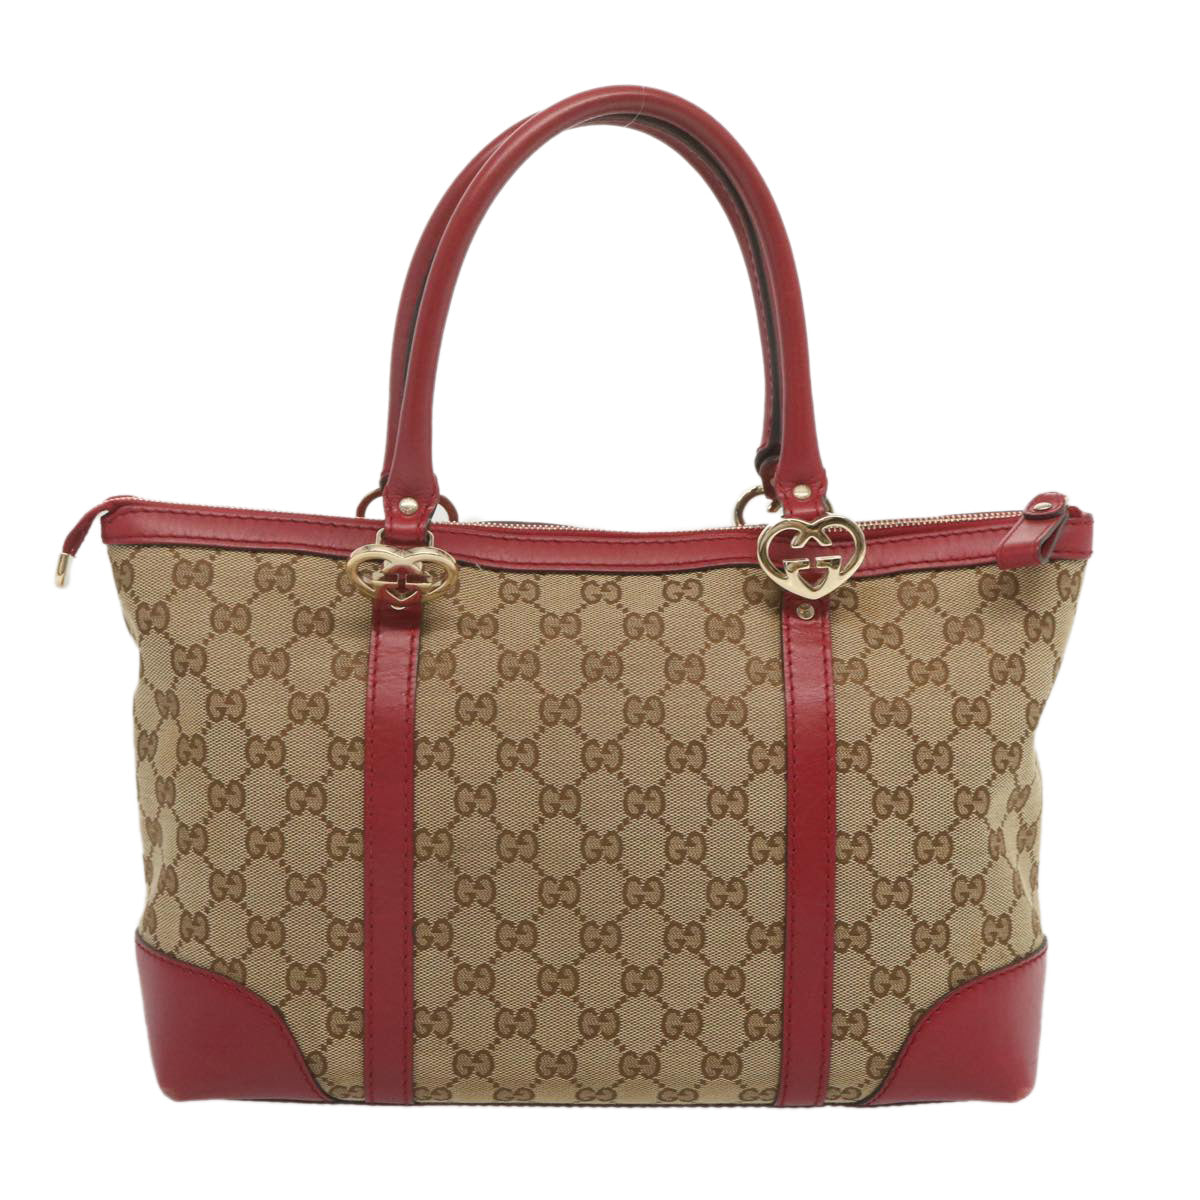 GUCCI GG Canvas Tote Bag Beige Red 257069 Auth 69451 - 0